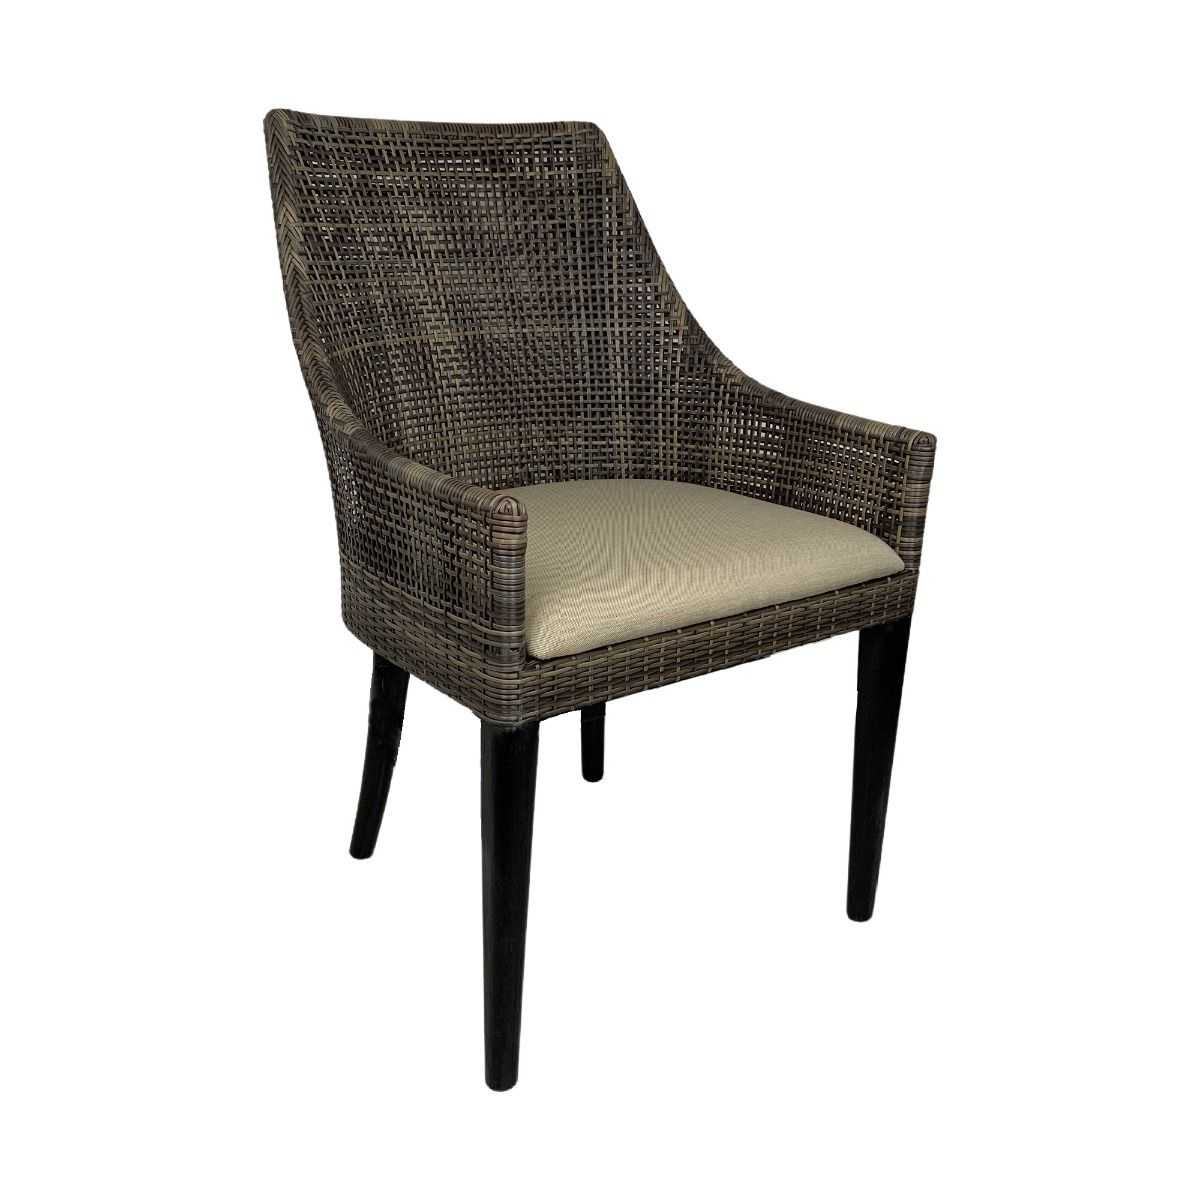 CR Tennessee Synthetic Rattan Outdoor Chair